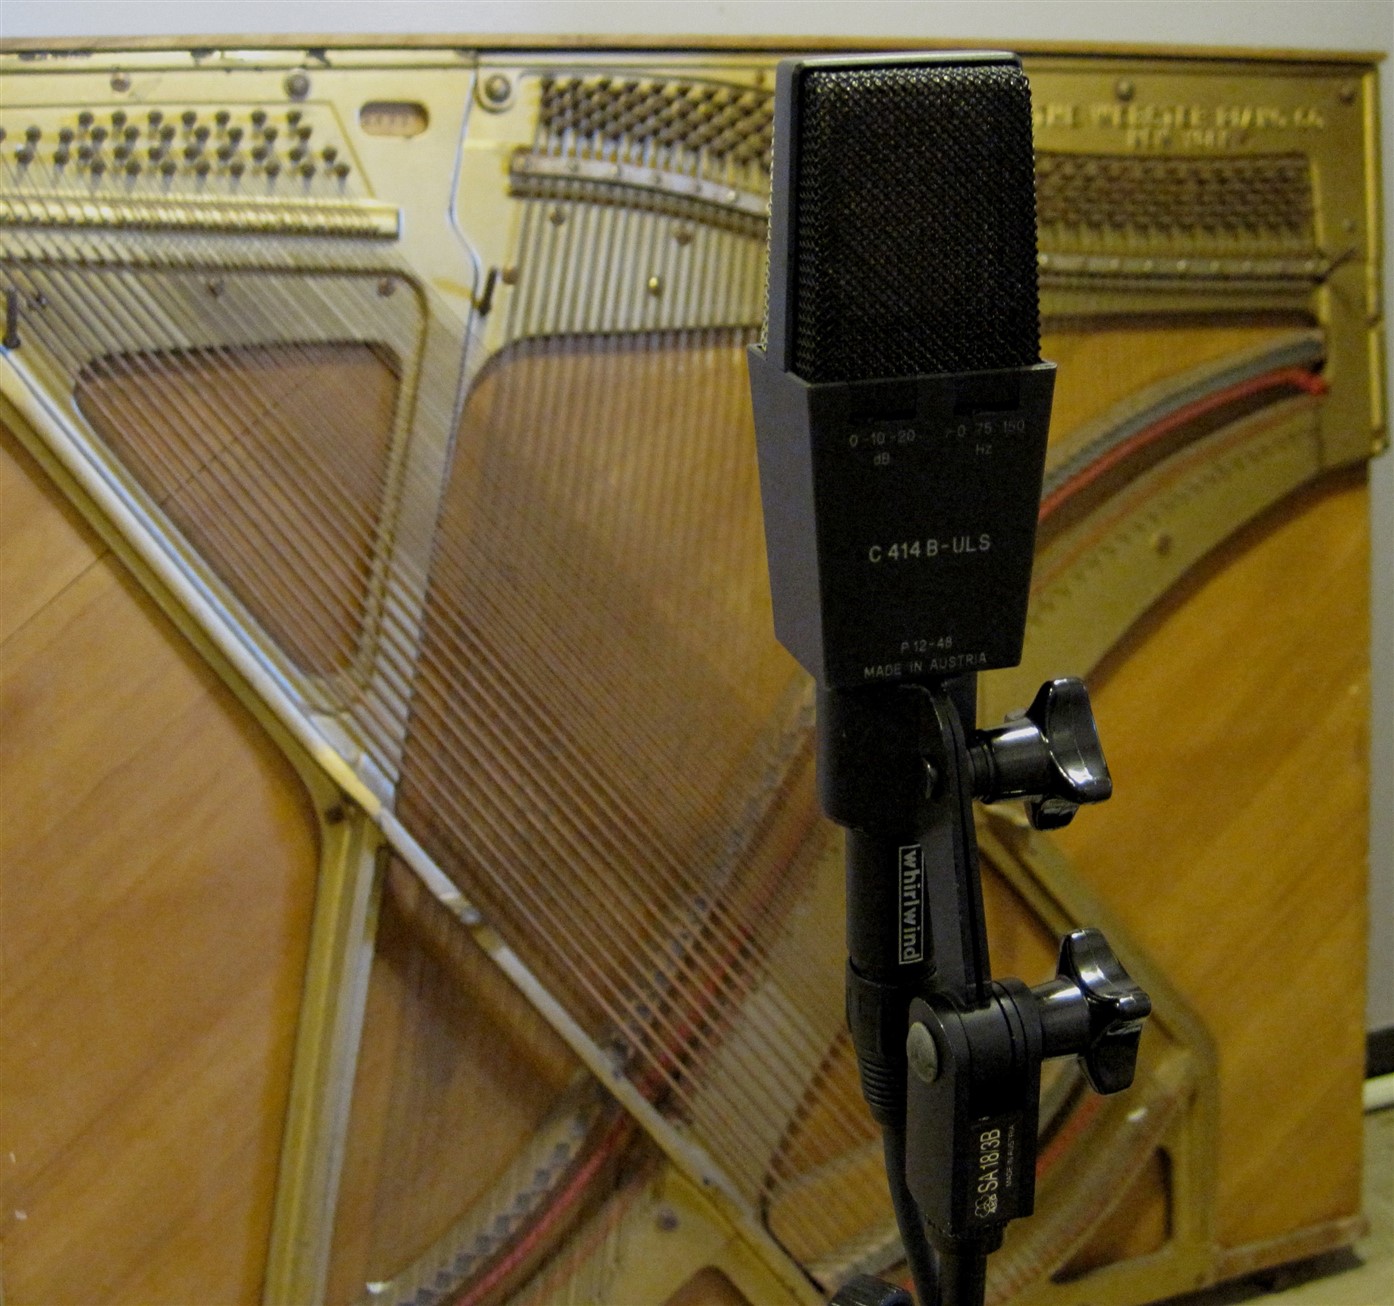 The strings of piano with a microphone in front